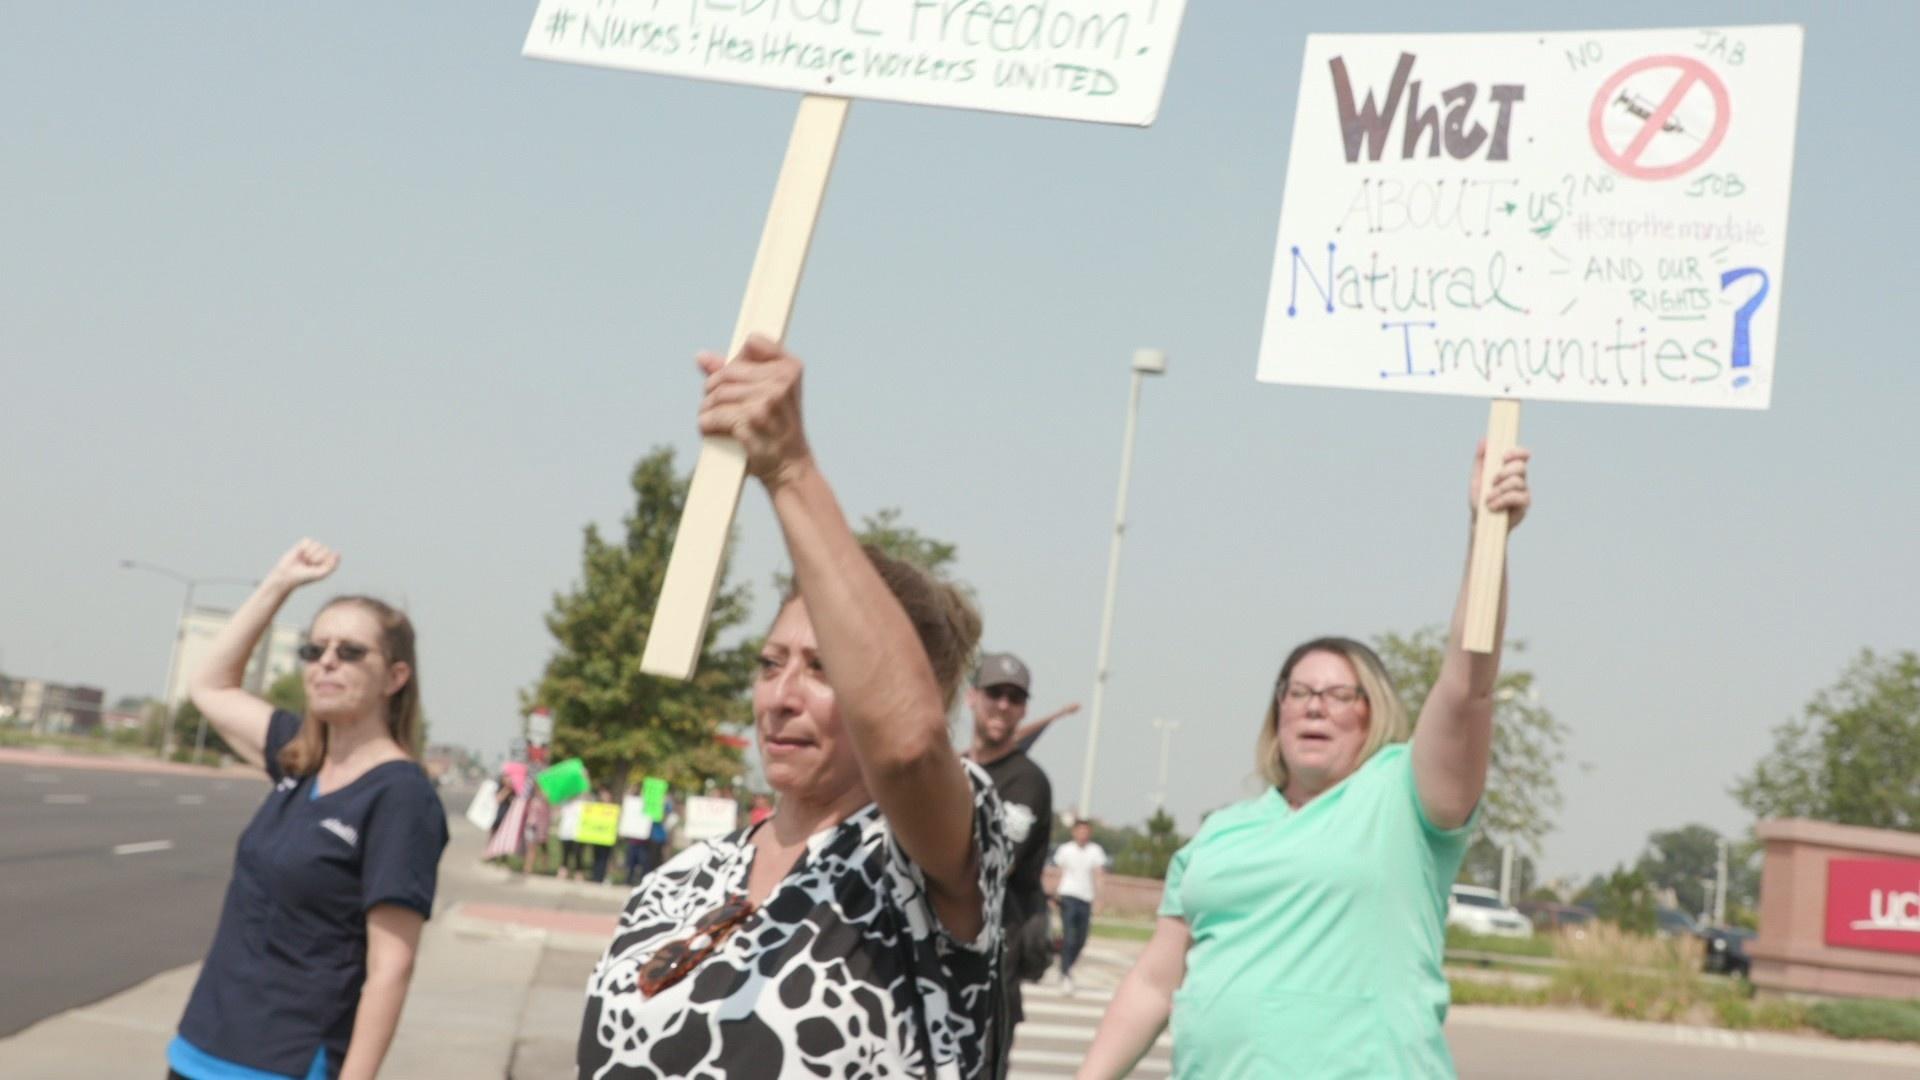 Stephanie Thorpe, far left, and Kinley Queen-Thompson, far right, protest with others against COVID-19 vaccine mandates outside the the UCHealth Anschutz Medical Campus, August 9.